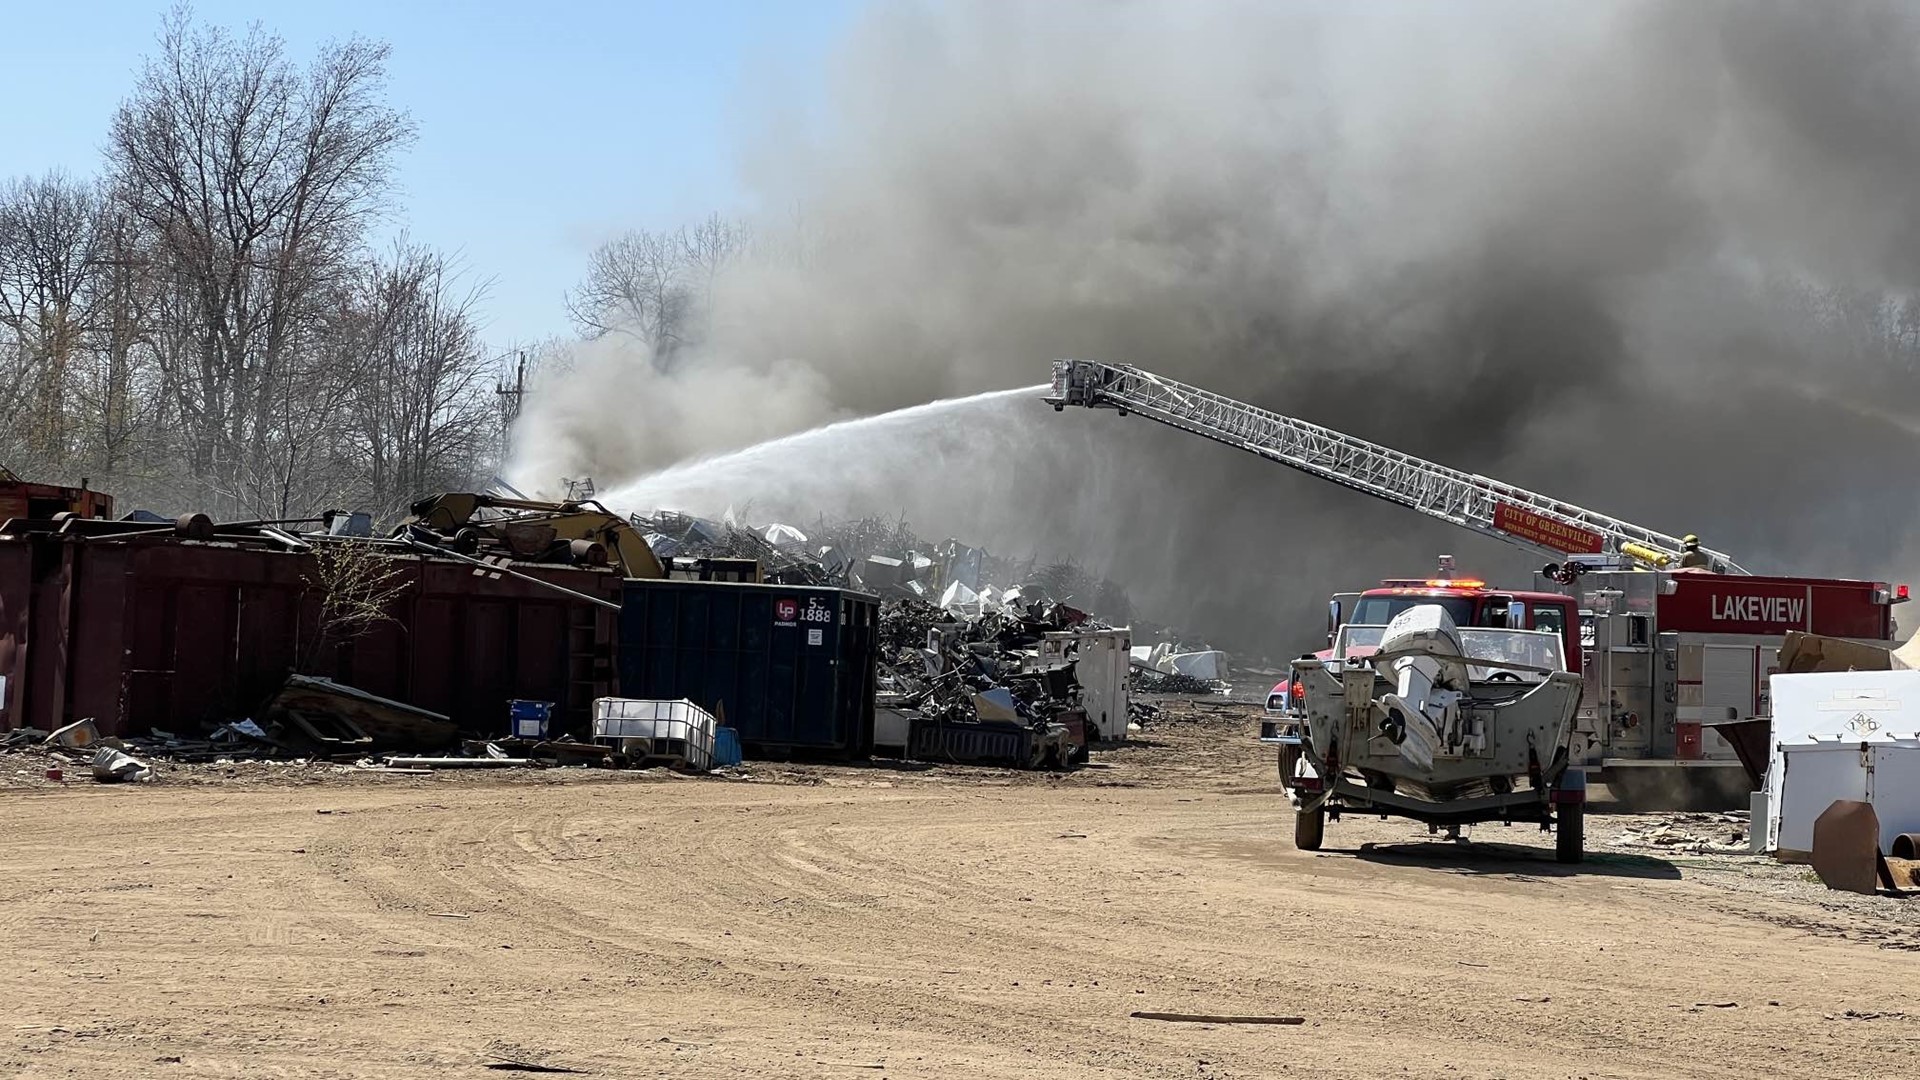 Multiple fire engines responded to the fire at a recycling center north of Greenville.